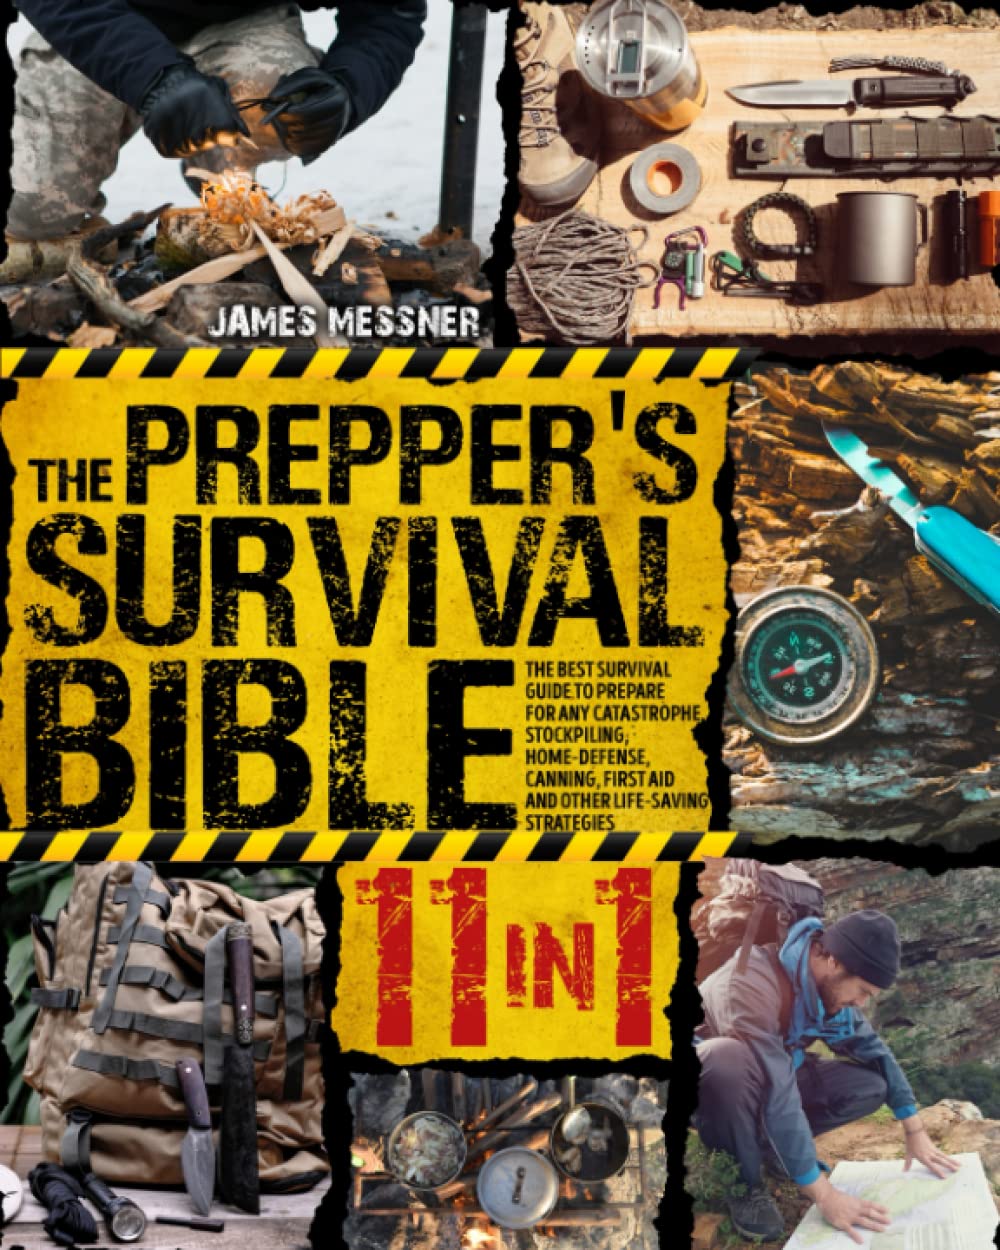 The Prepper’s Survival Bible: 11 in 1. The Best Survival Guide to Prepare for Any Catastrophe. Stockpiling, Home-Defense, Canning, first Aid, and Other Life-Saving Strategies.